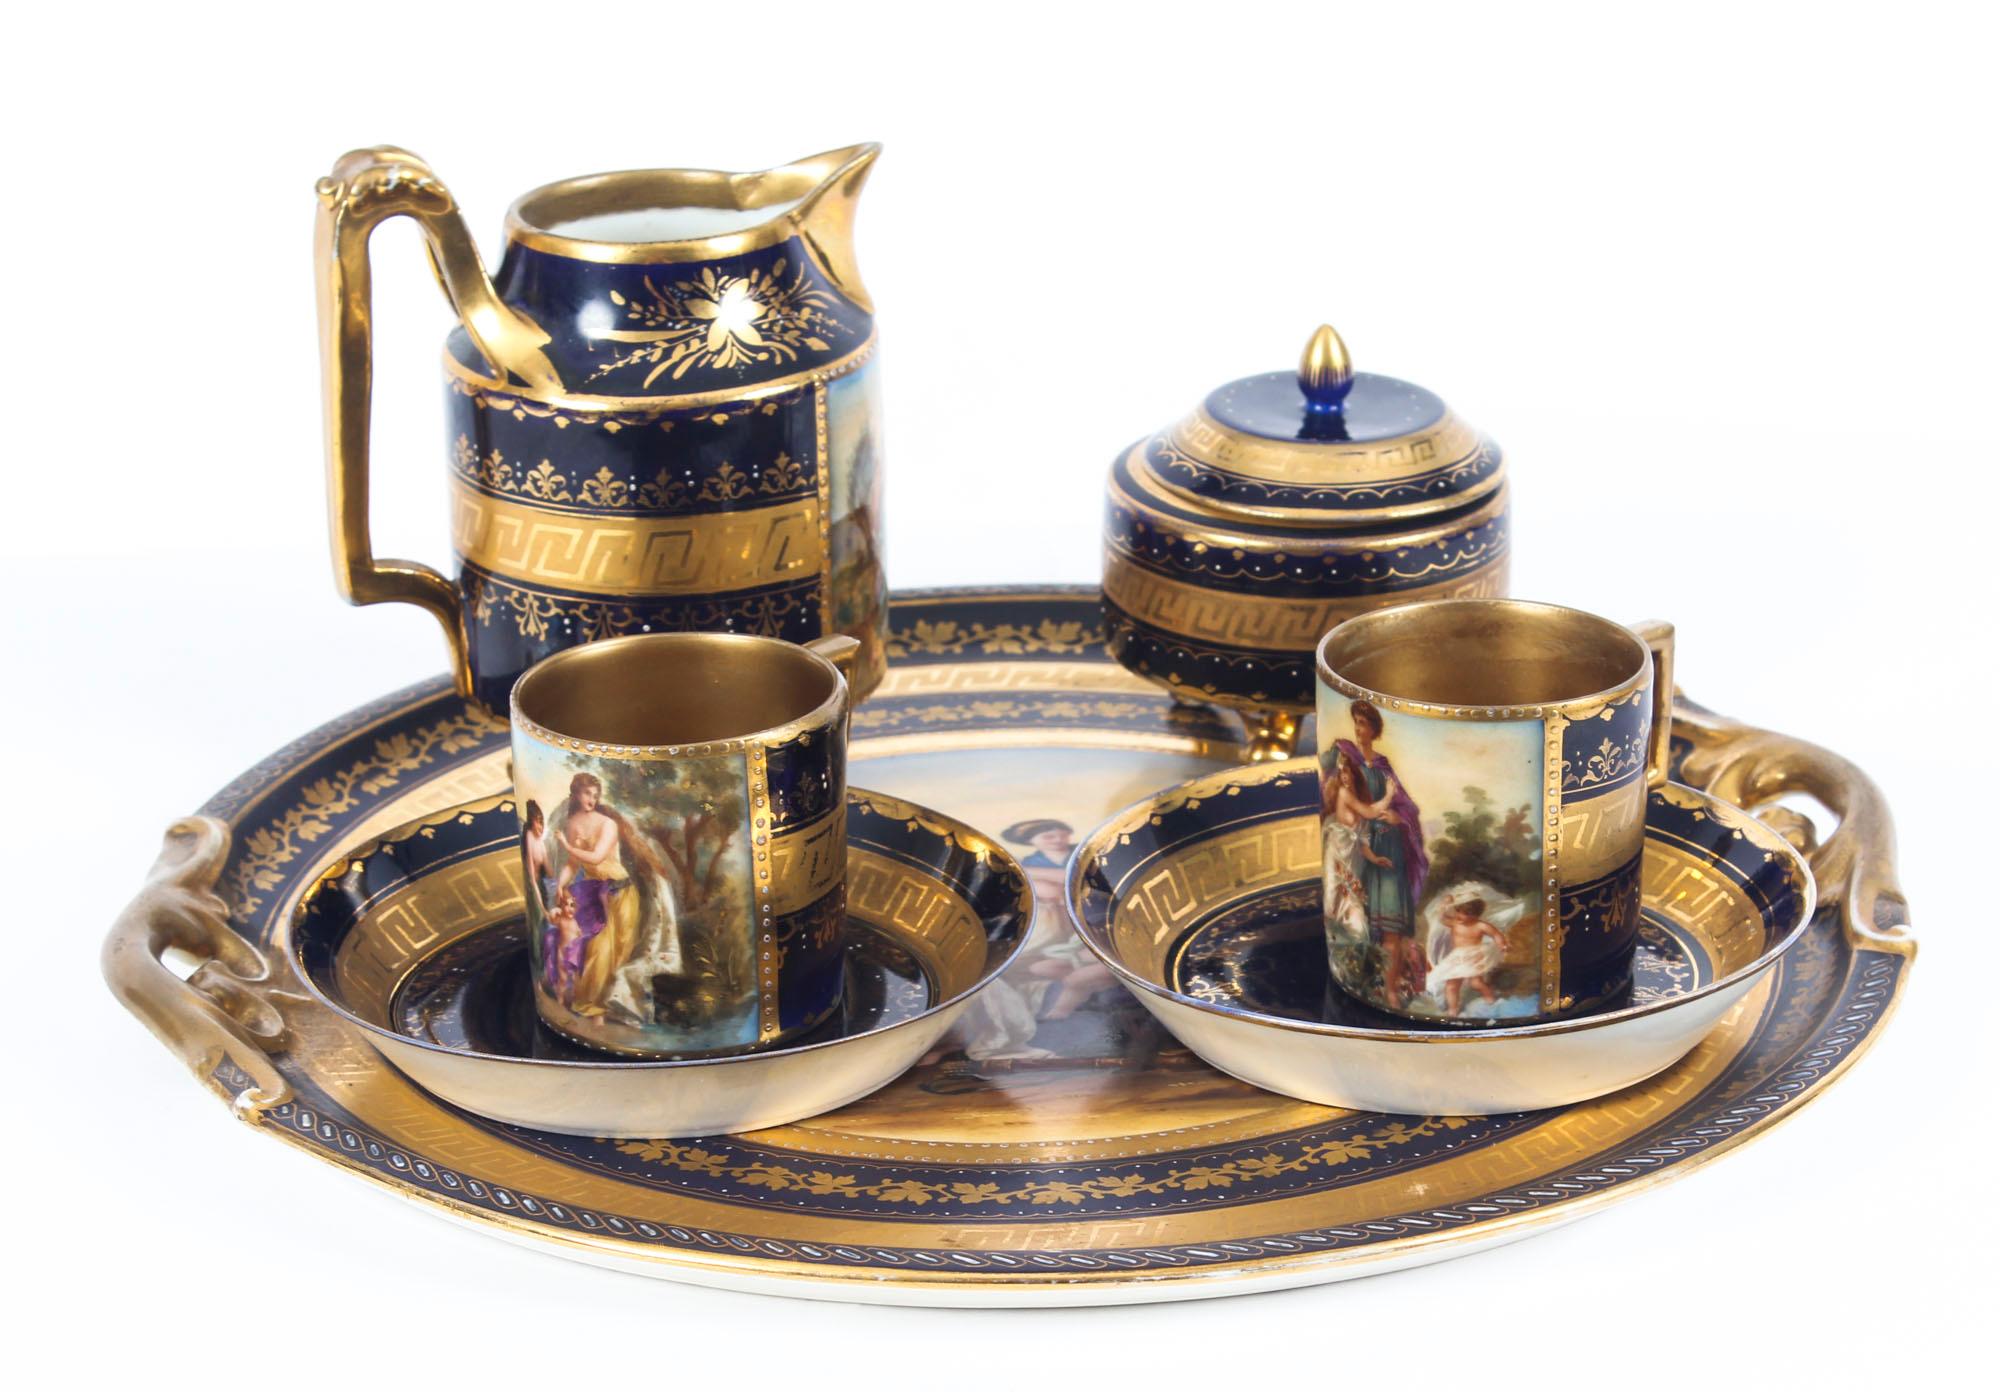 This is a delightful antique Vienna porcelain cabaret tray breakfast set, late 19th century in date.

It comprises a pair of coffee cups with saucers, a cream jug, a sugar bowl with lid and a cabaret tray. It is all beautifully gilded and painted